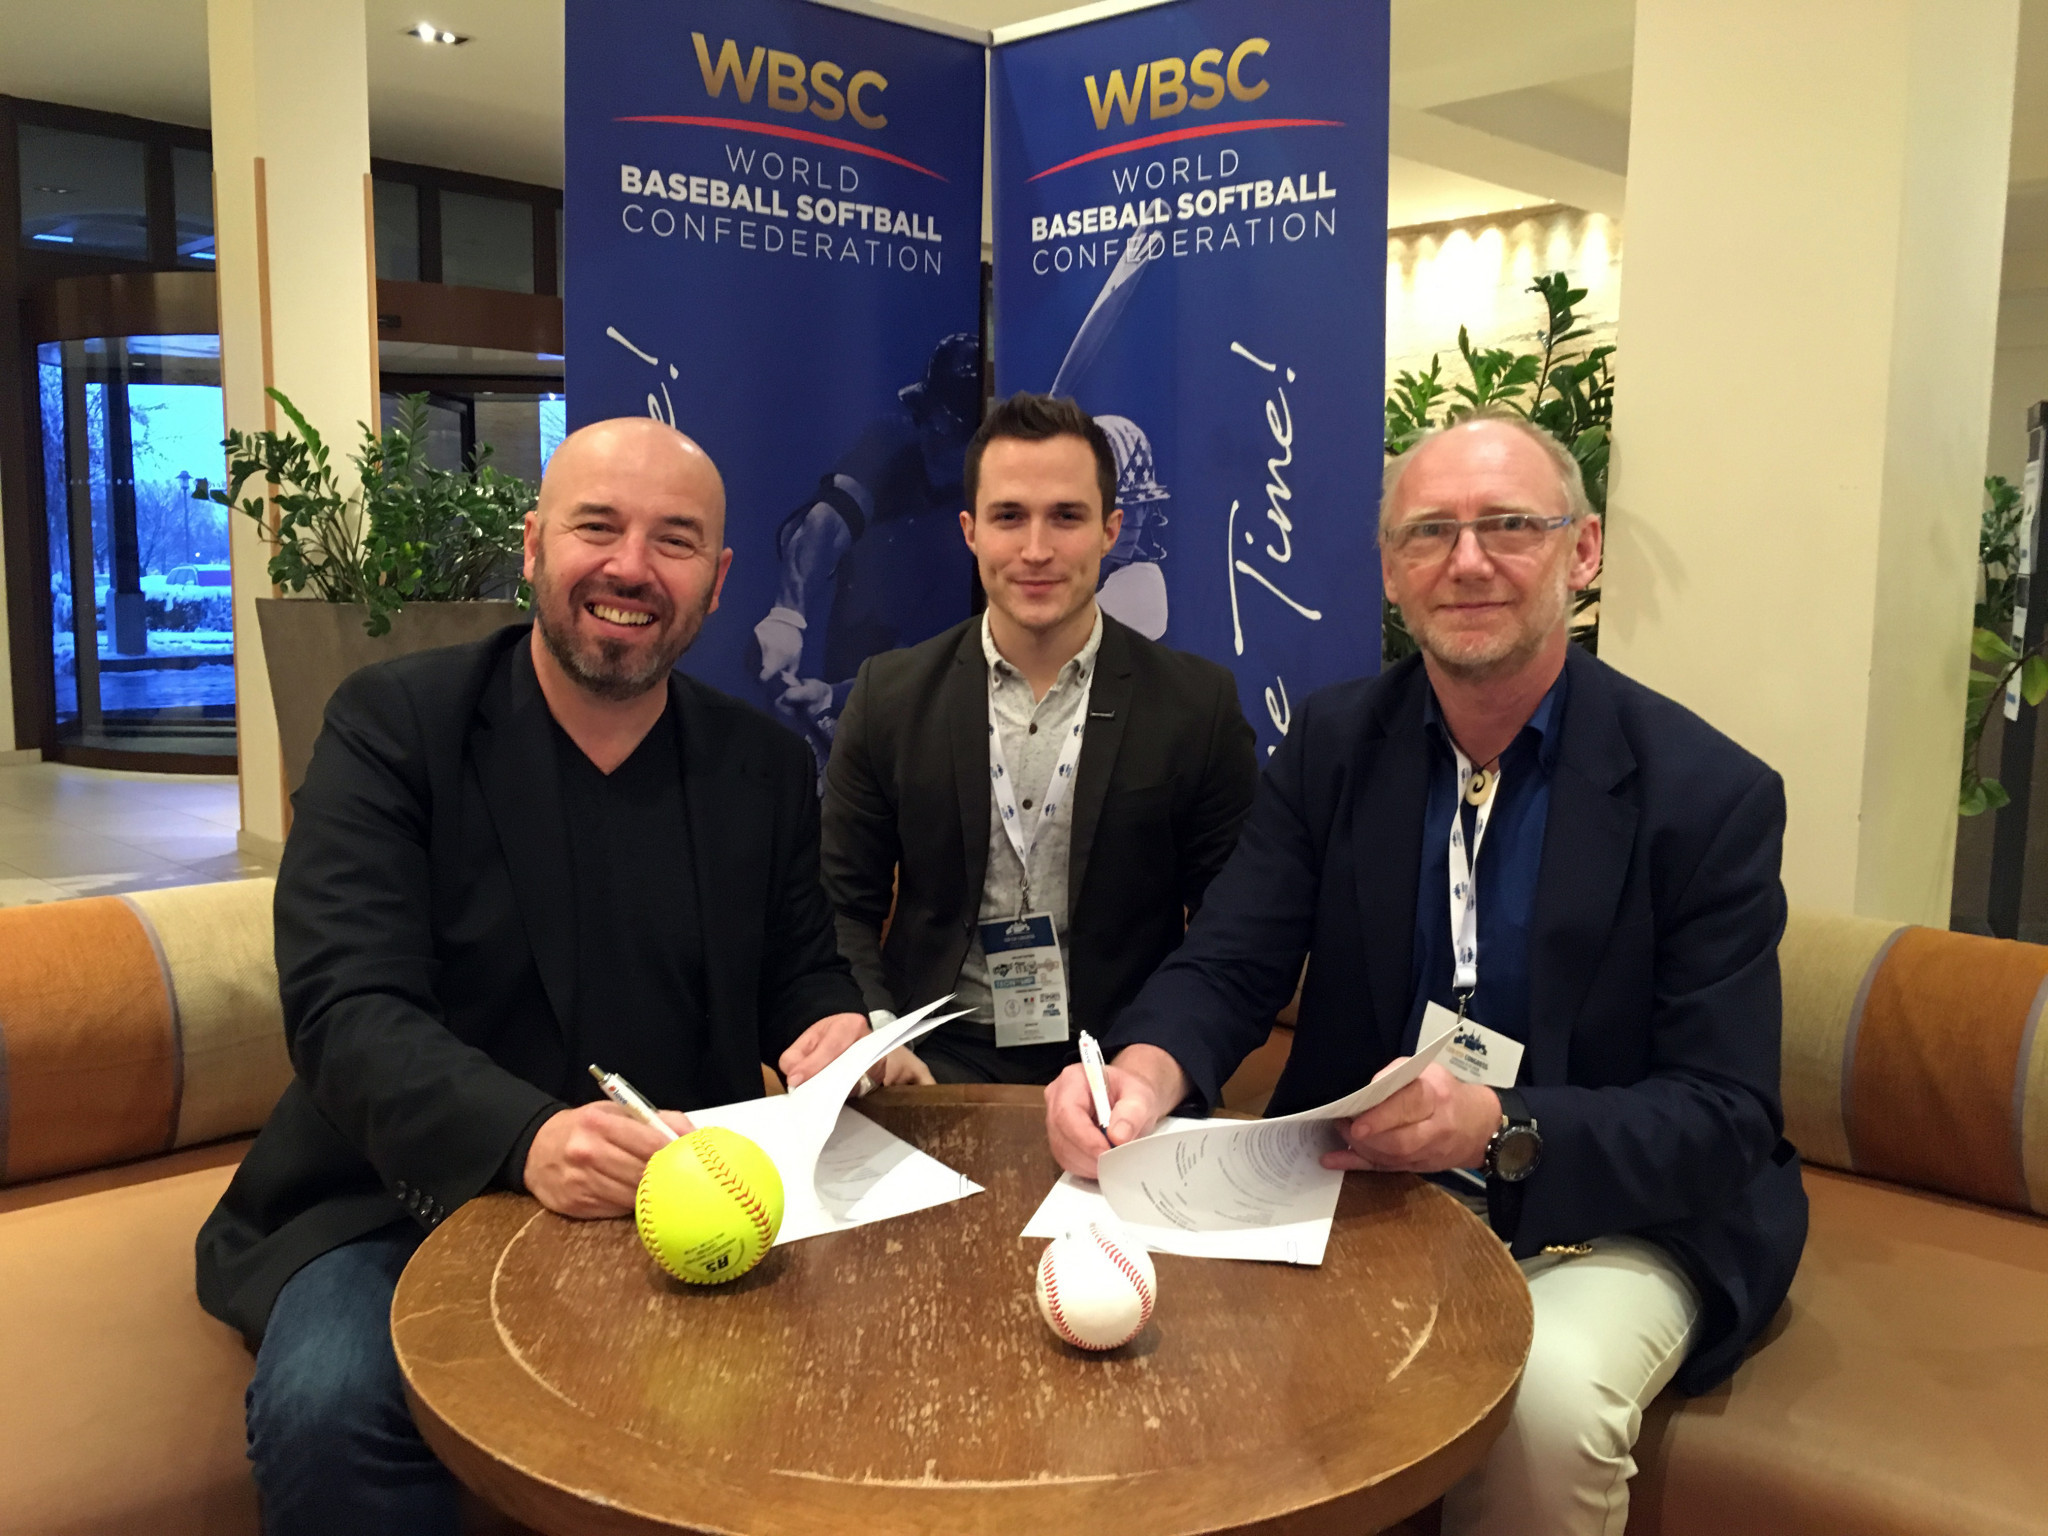 WBSC Europe announce partnership with Sportradar